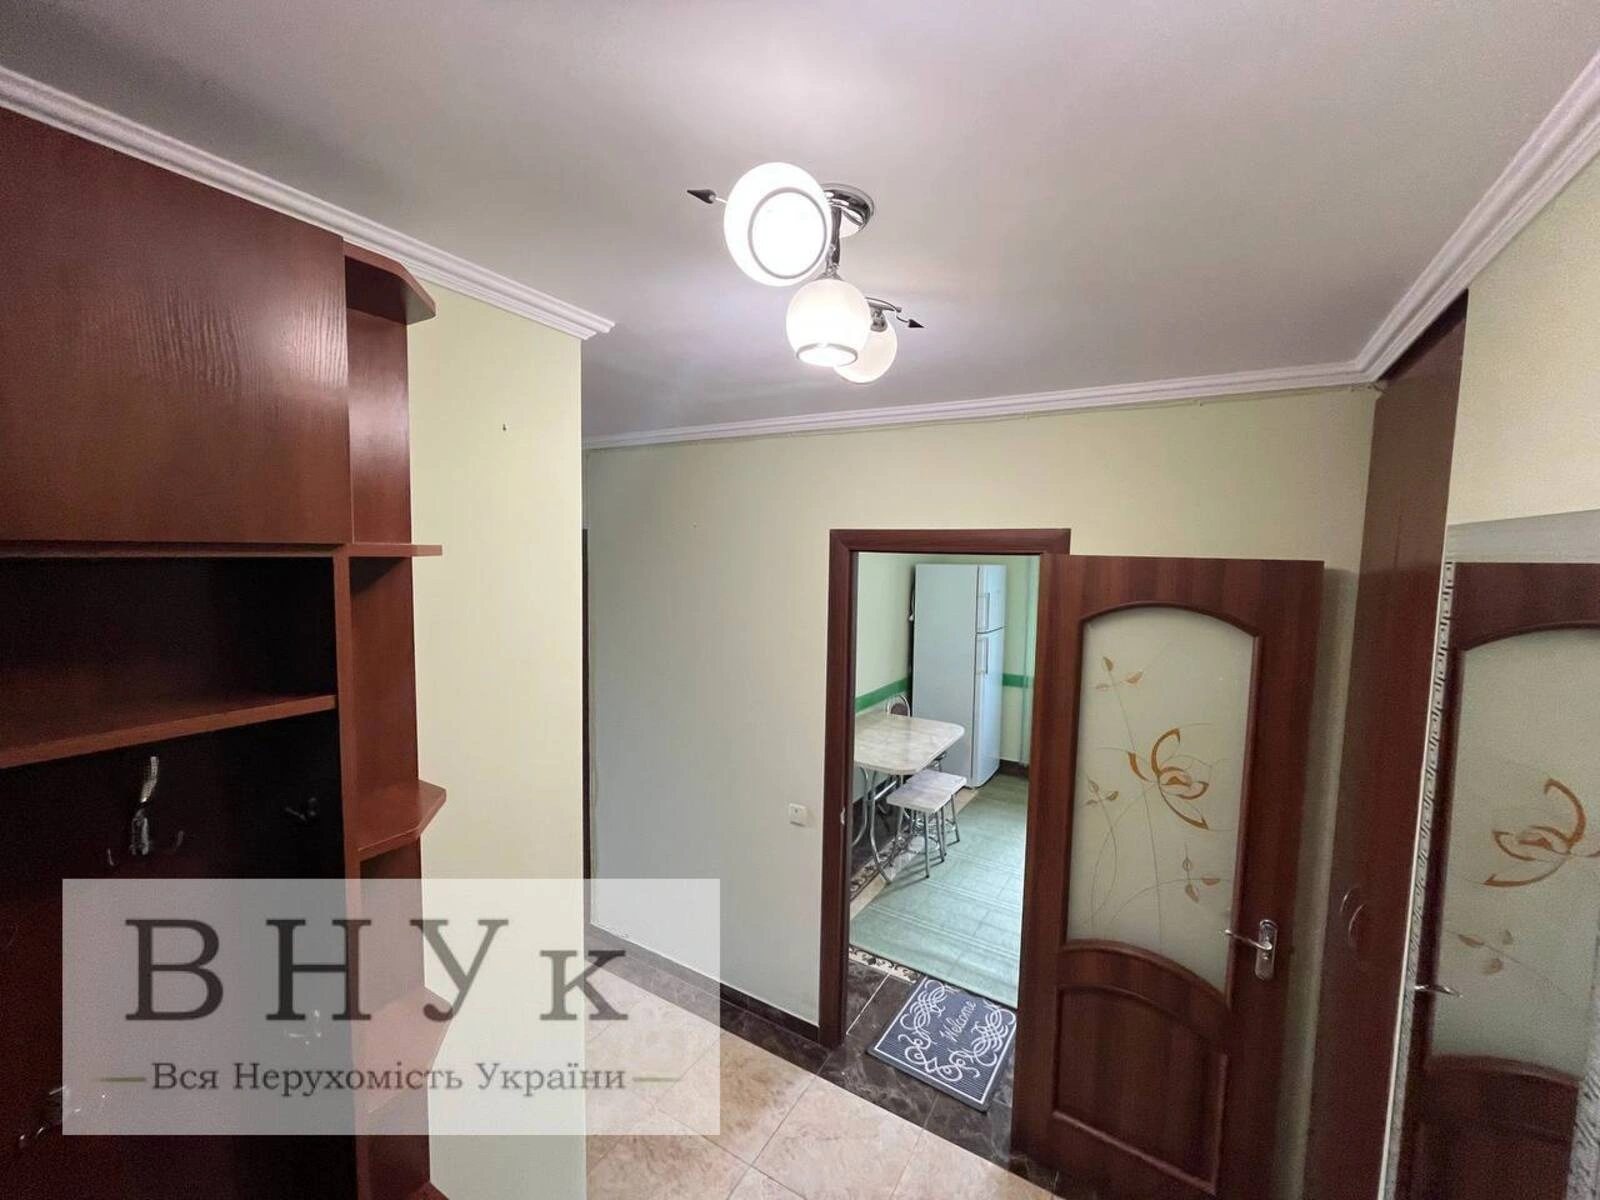 Apartments for sale. 2 rooms, 62 m², 3rd floor/10 floors. 5, Troleybusna vul., Ternopil. 